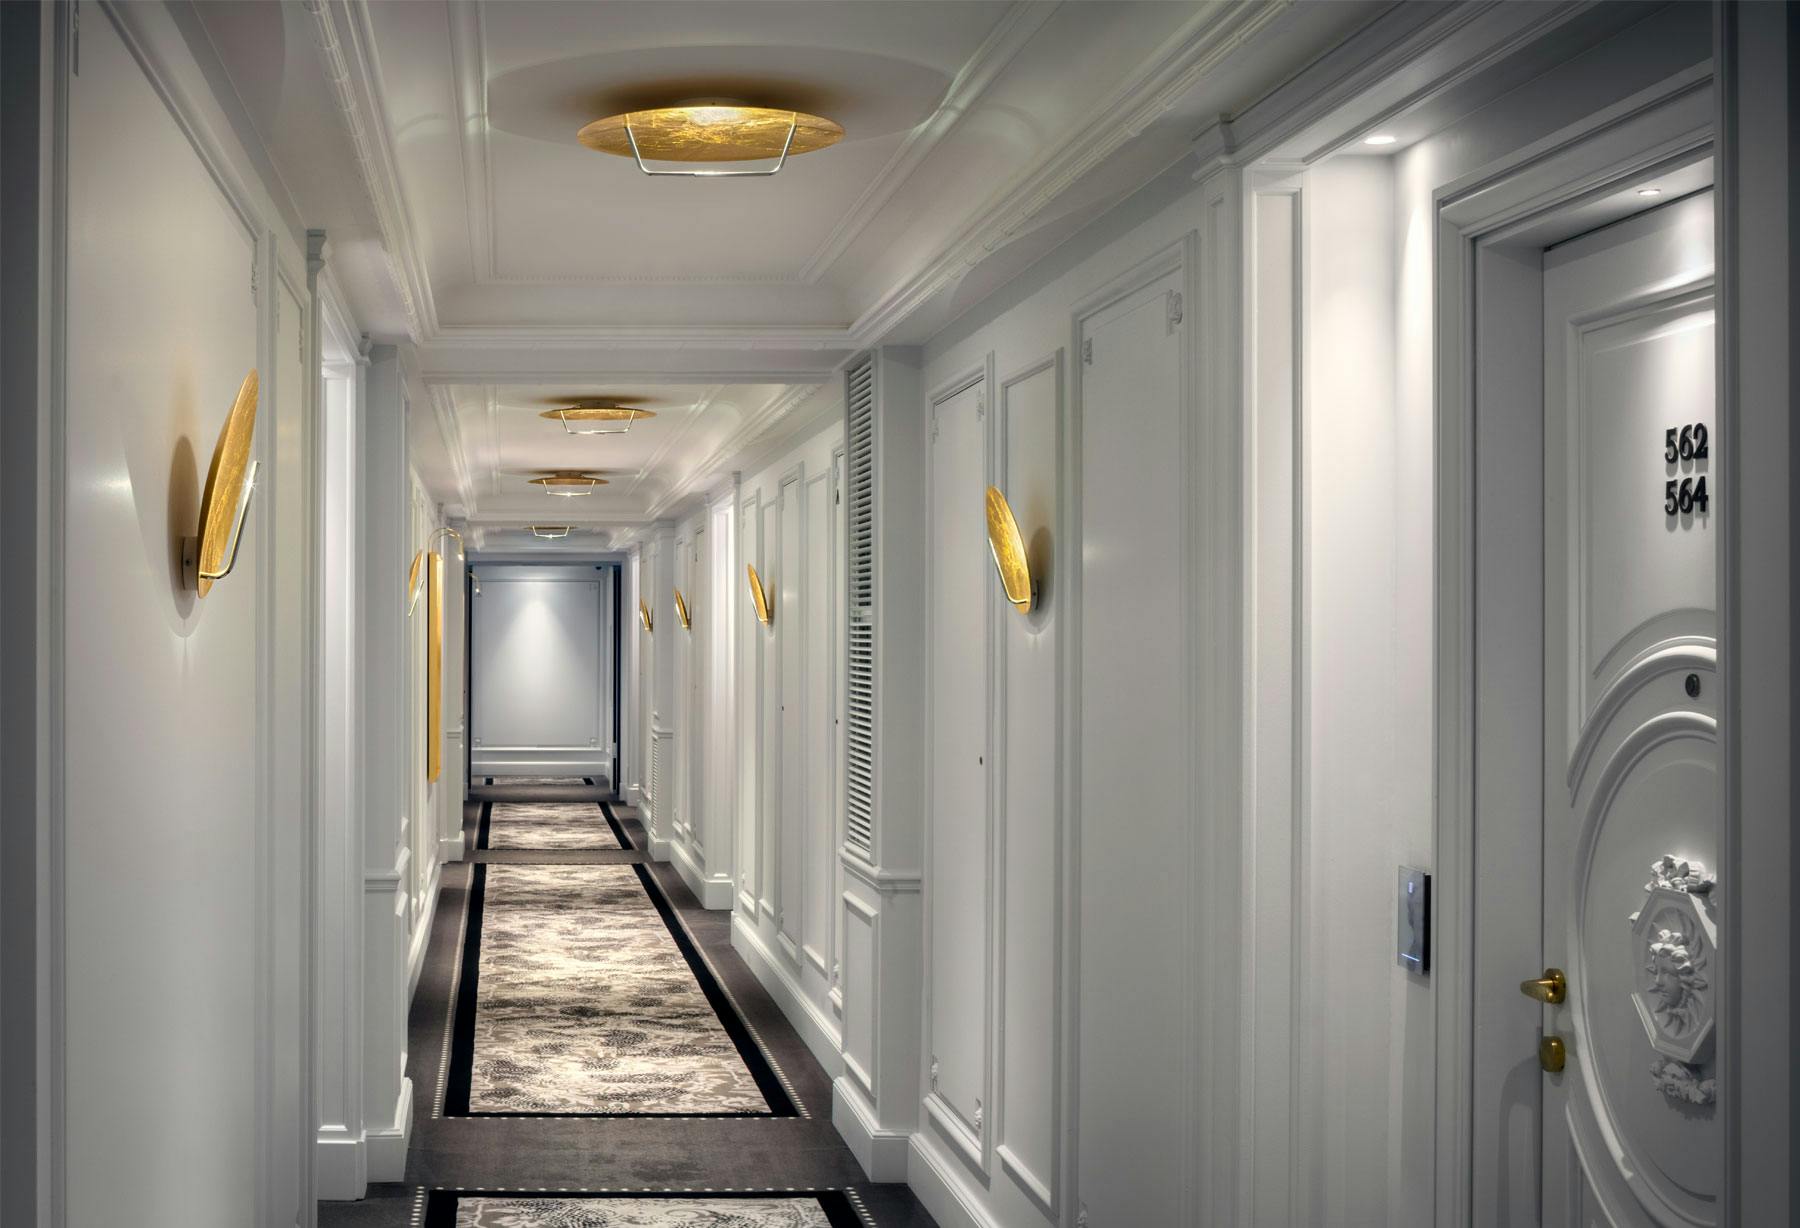 <p>Catellani &amp; Smith works with Hotel de Paris in Montecarlo, Principality of Monaco, to illuminate some restored key areas of one of the most prestigious Hotel in the world. The lights chosen are an LED version of “Disco” and a custom model of “Luna LED” wall lamp.</p>
